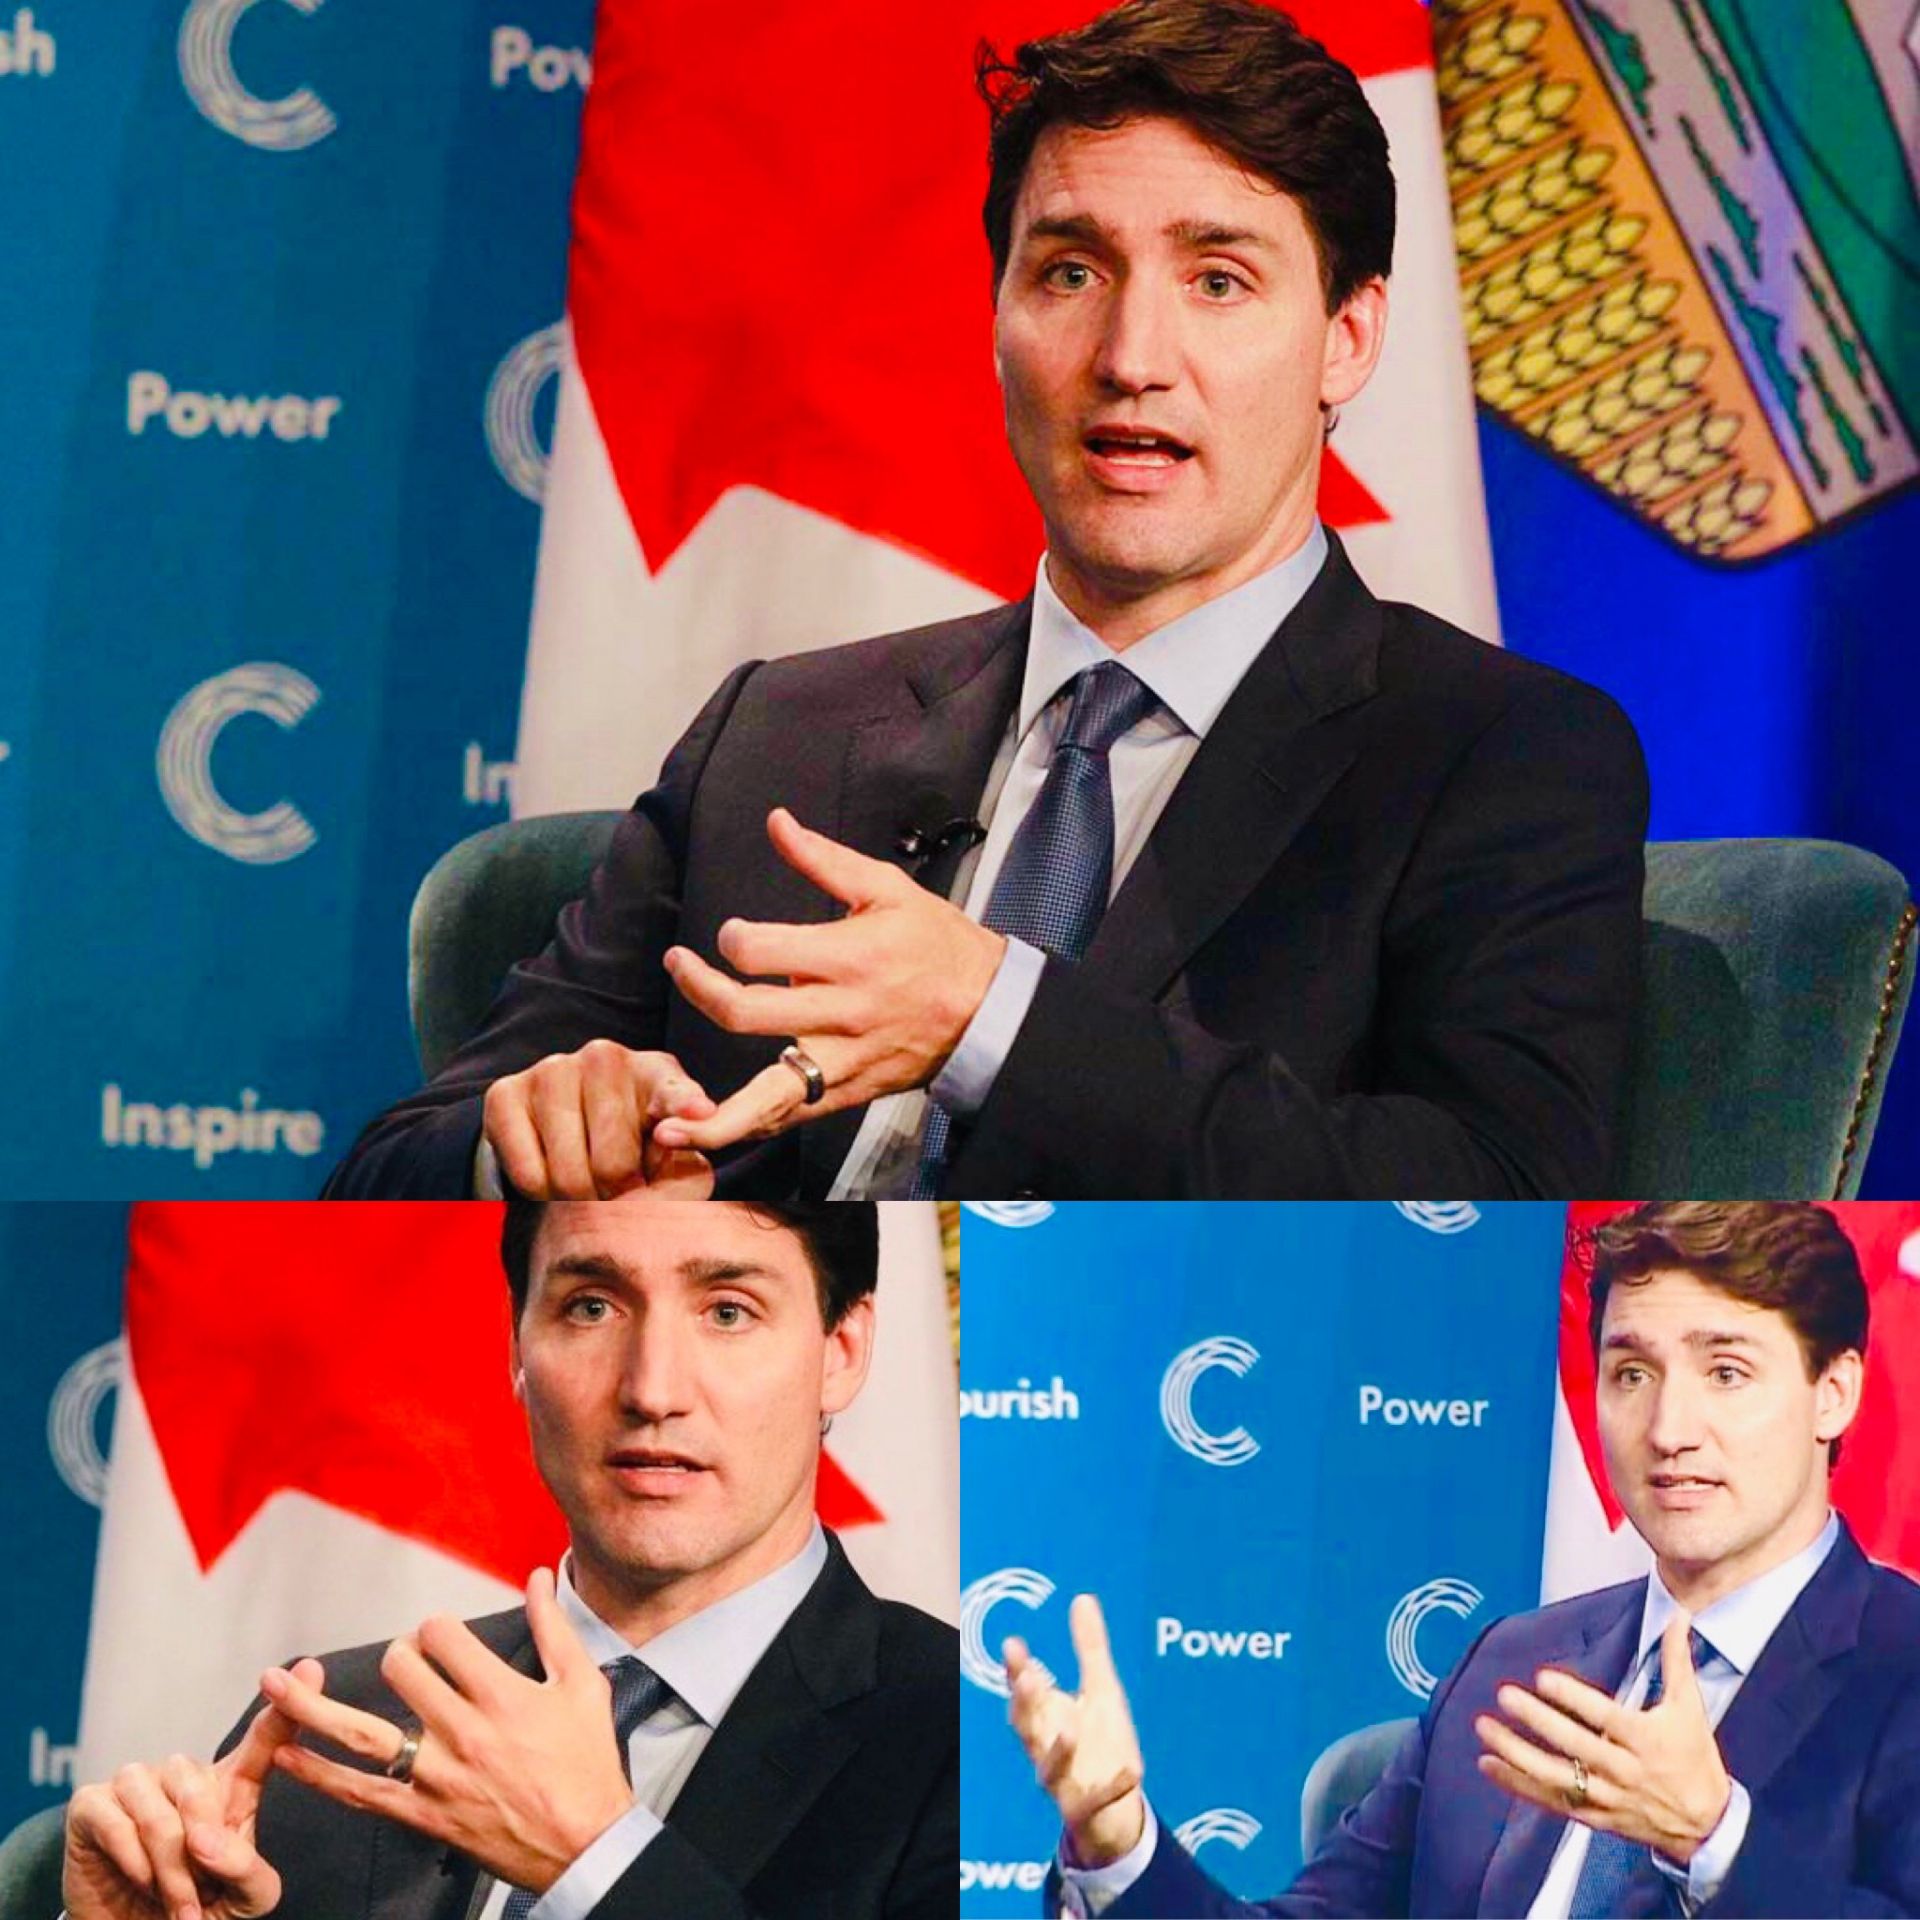 Trudeau answering a question Blank Meme Template